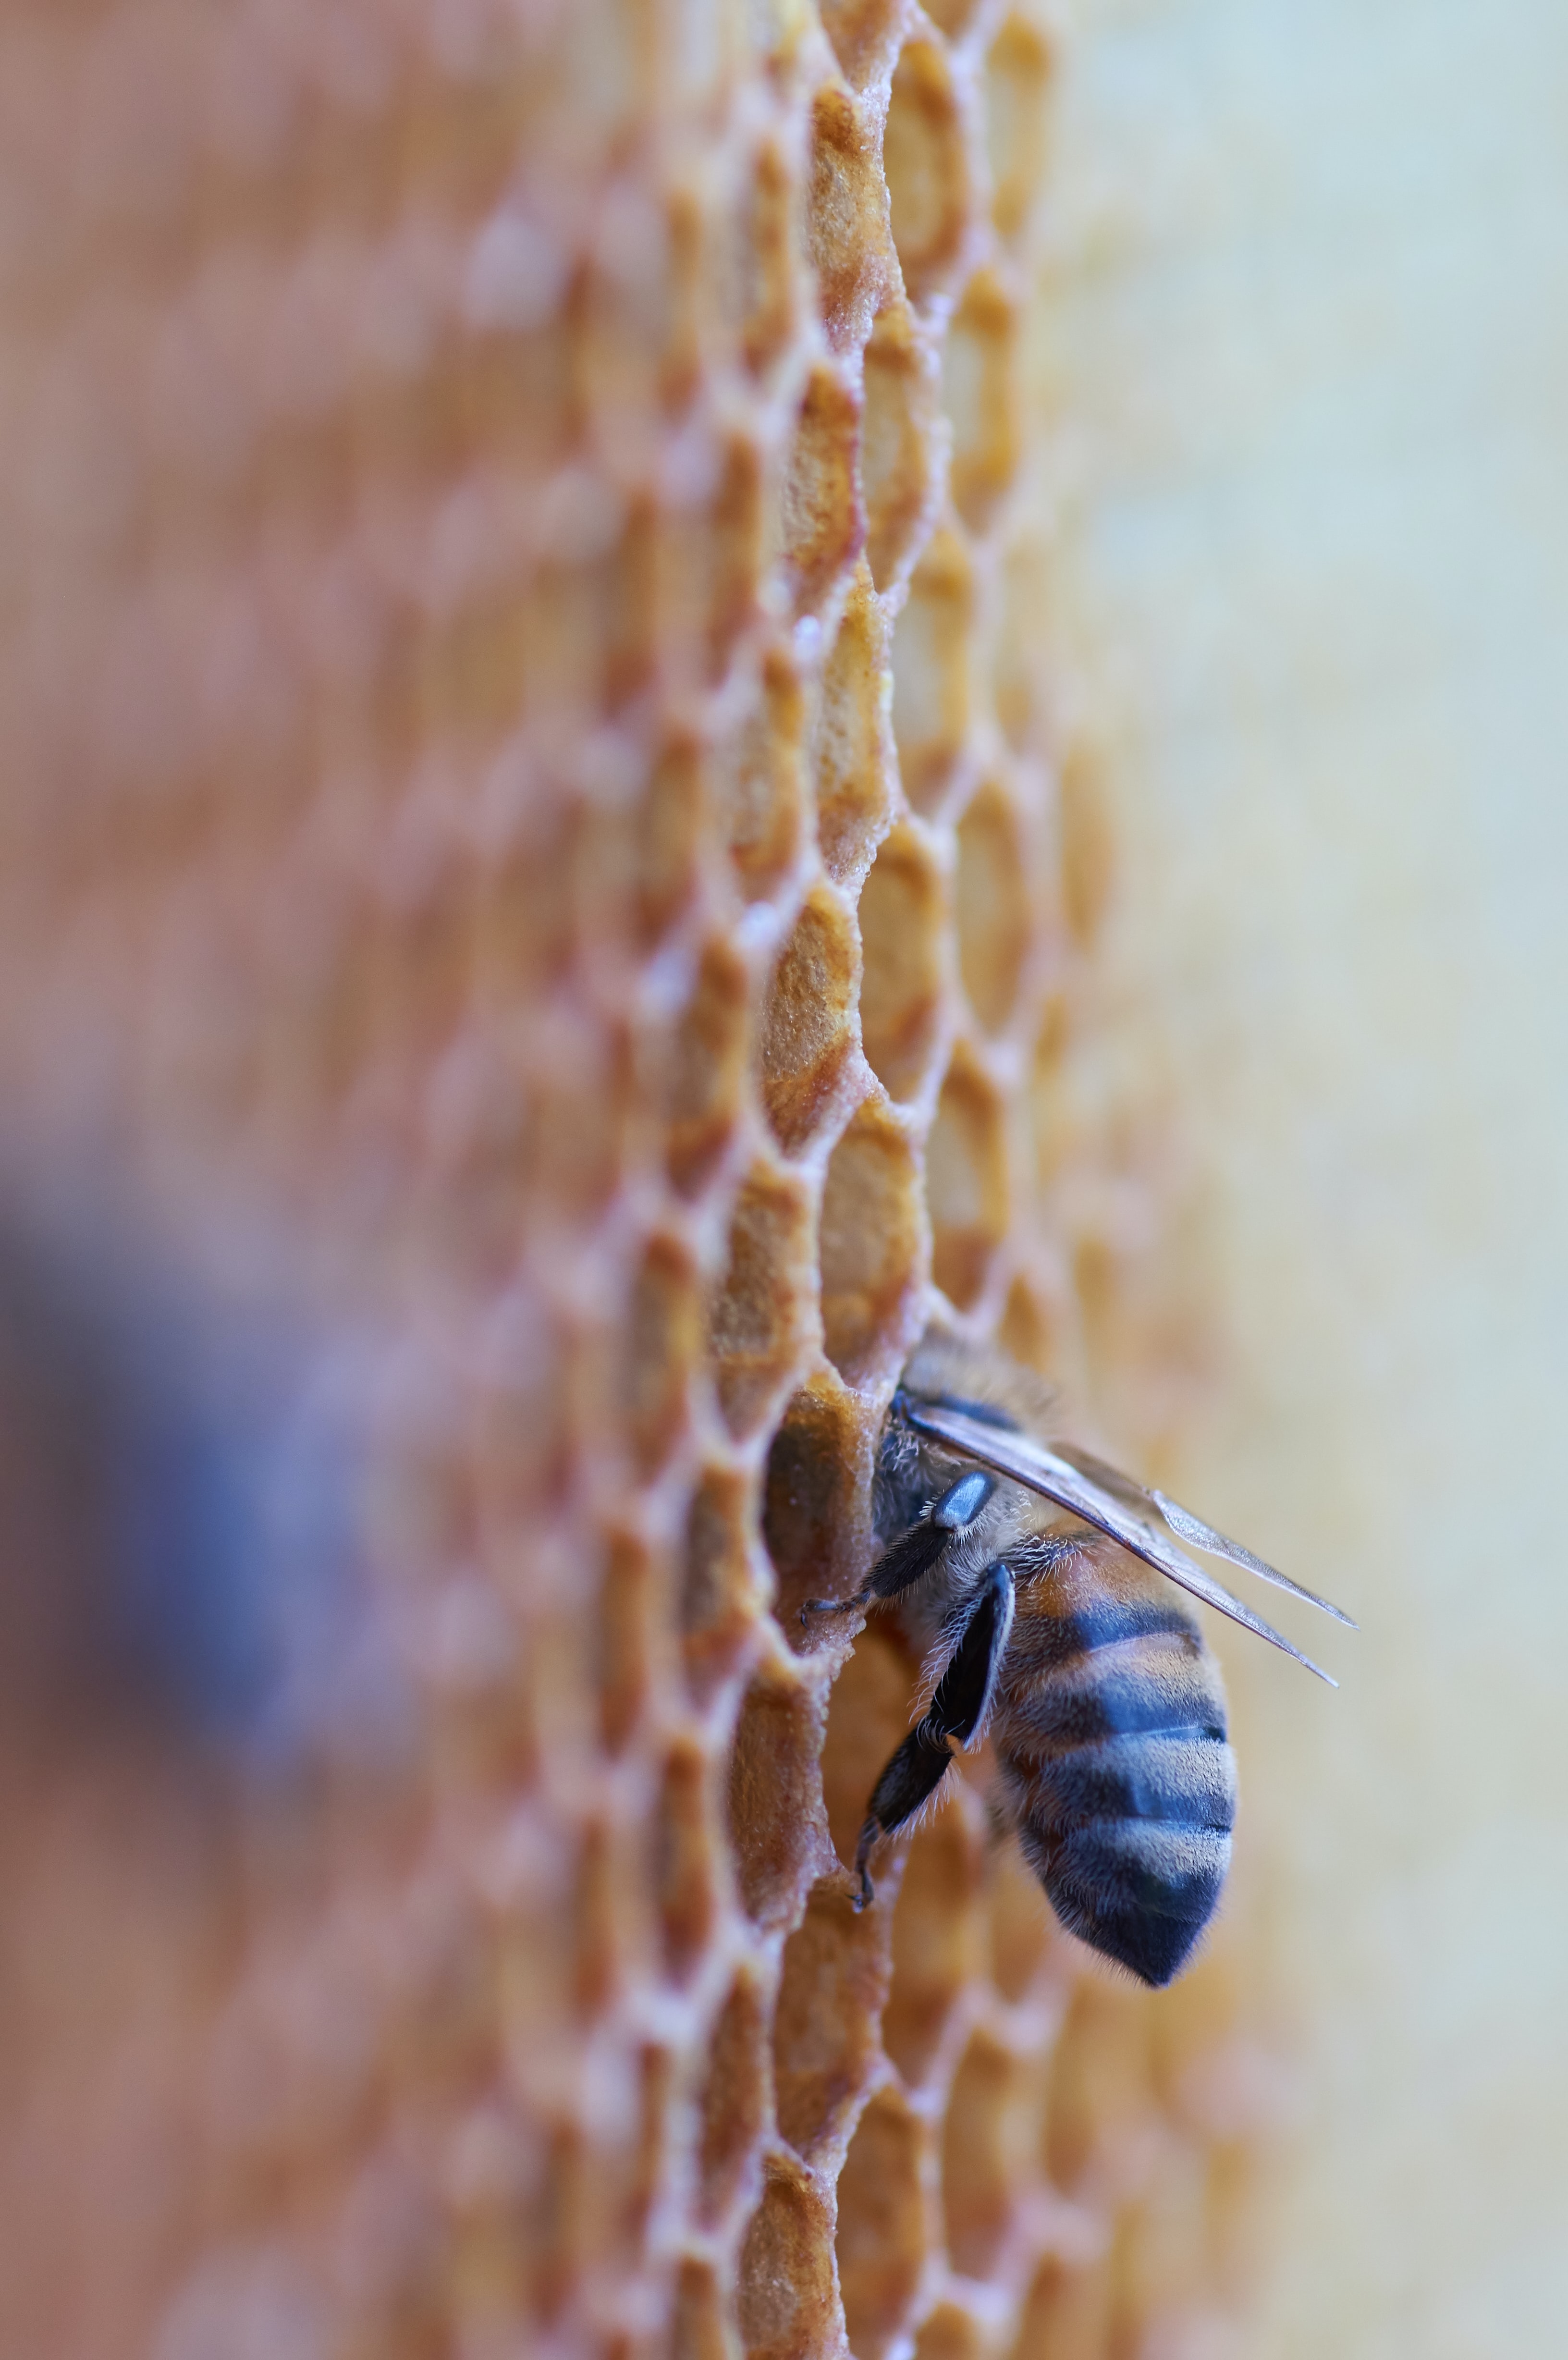 80106 download wallpaper bee, macro, insect, honeycomb screensavers and pictures for free